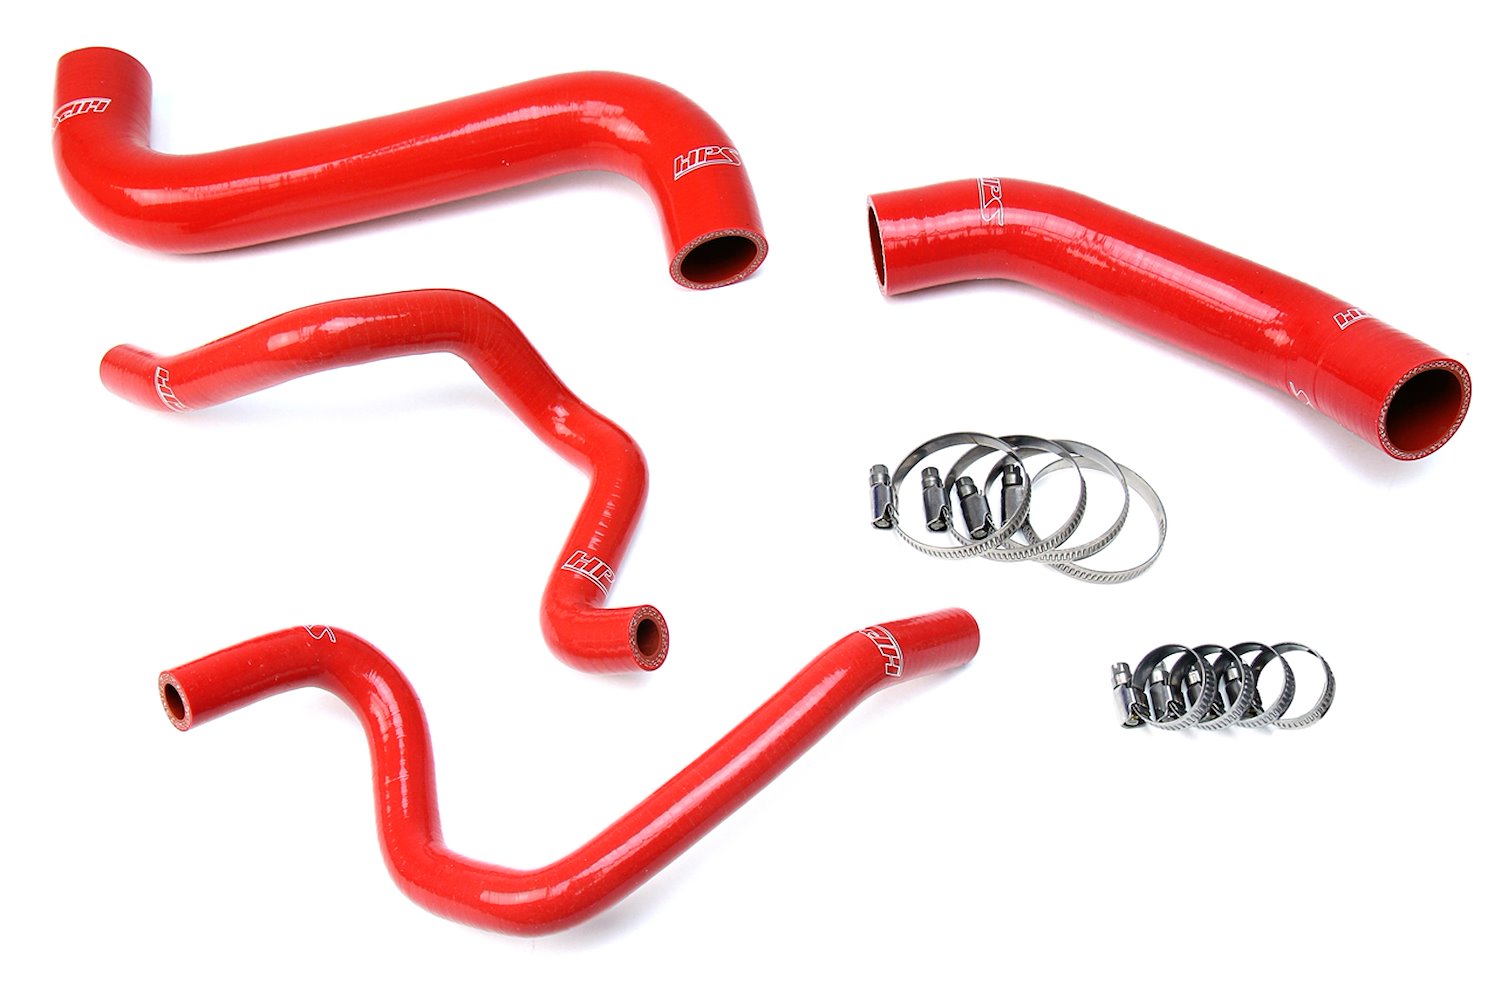 57-1732-RED Coolant Hose Kit, High-Temp 3-Ply Reinforced Silicone, Replace Rubber Radiator Heater Coolant Hoses